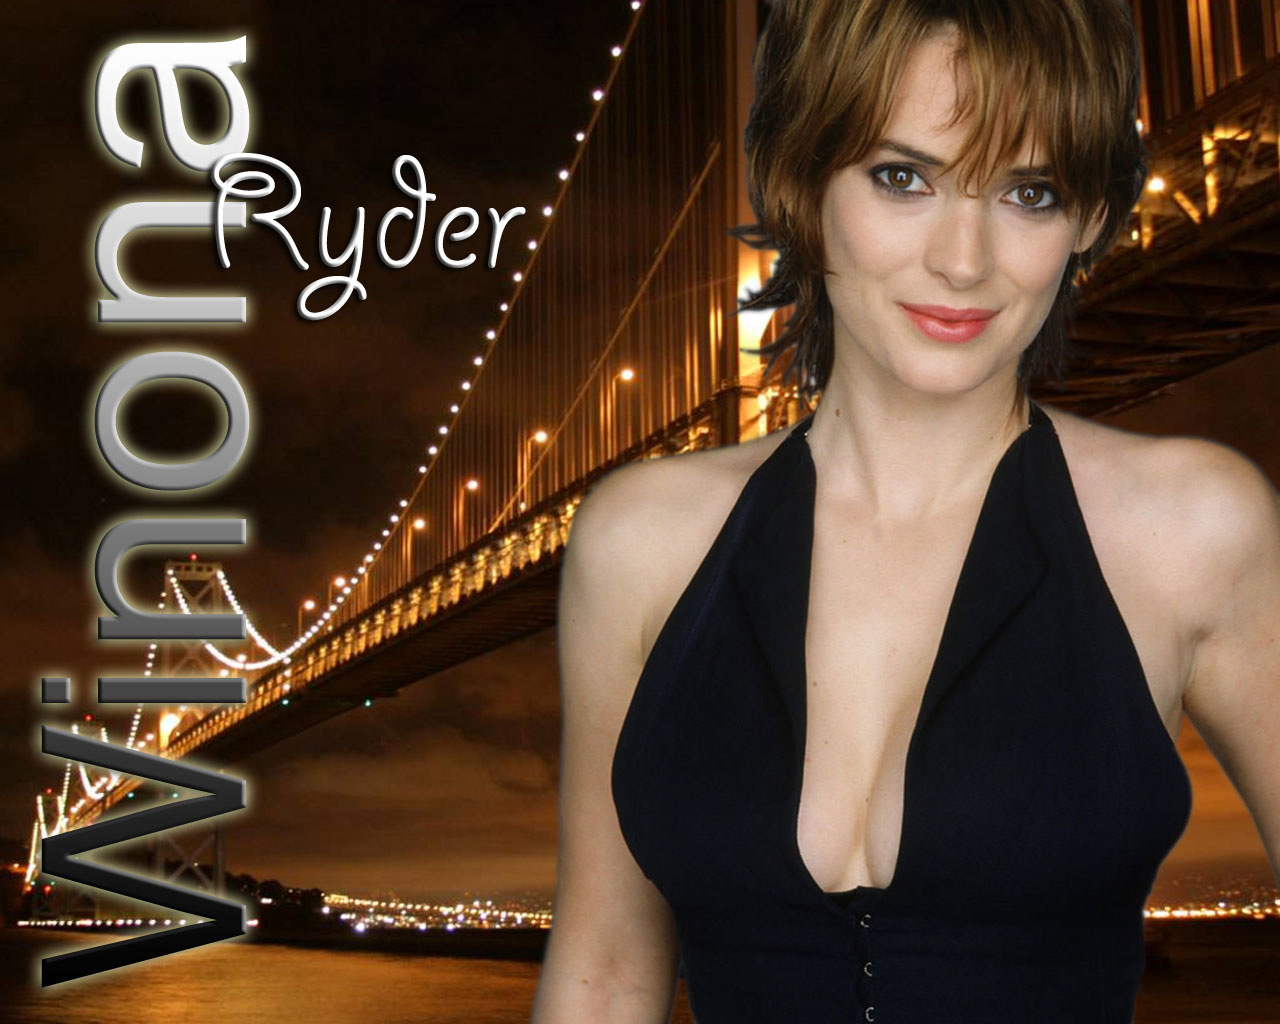 http://www.rexwallpapers.com/images/wallpapers/celebs/winona-ryder/winona_ryder_6.jpg